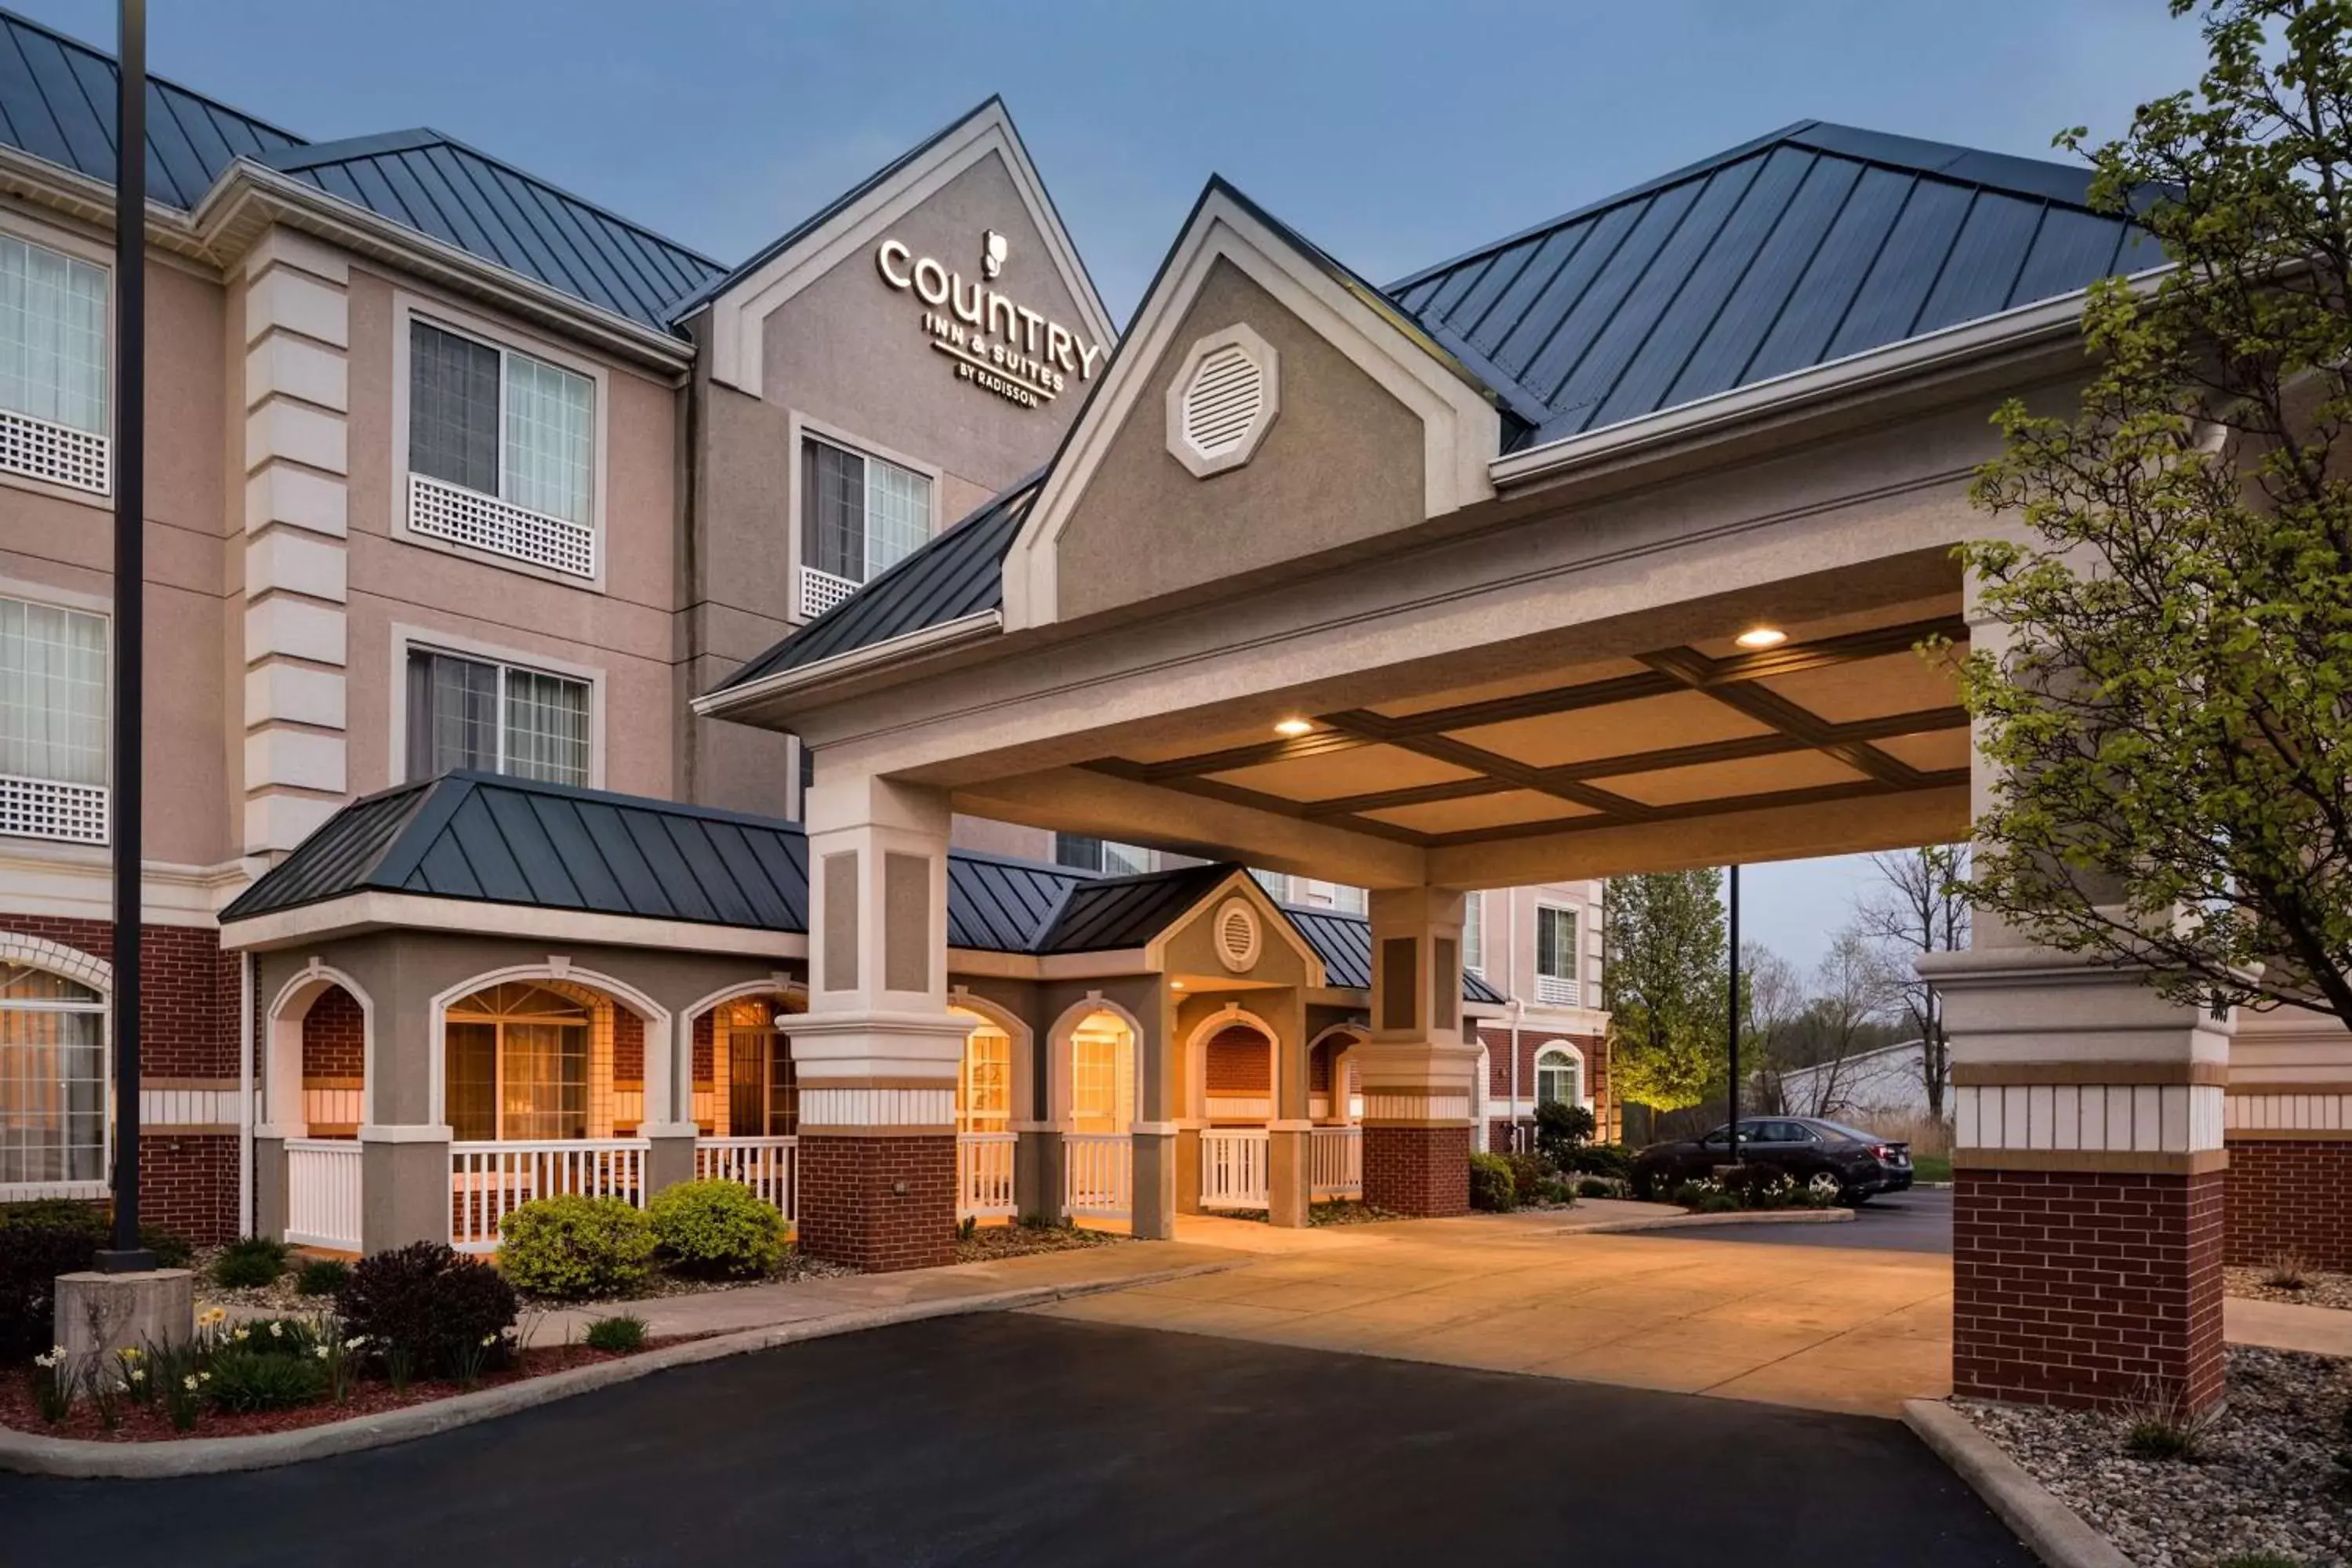 Property building in Country Inn & Suites by Radisson, Michigan City, IN